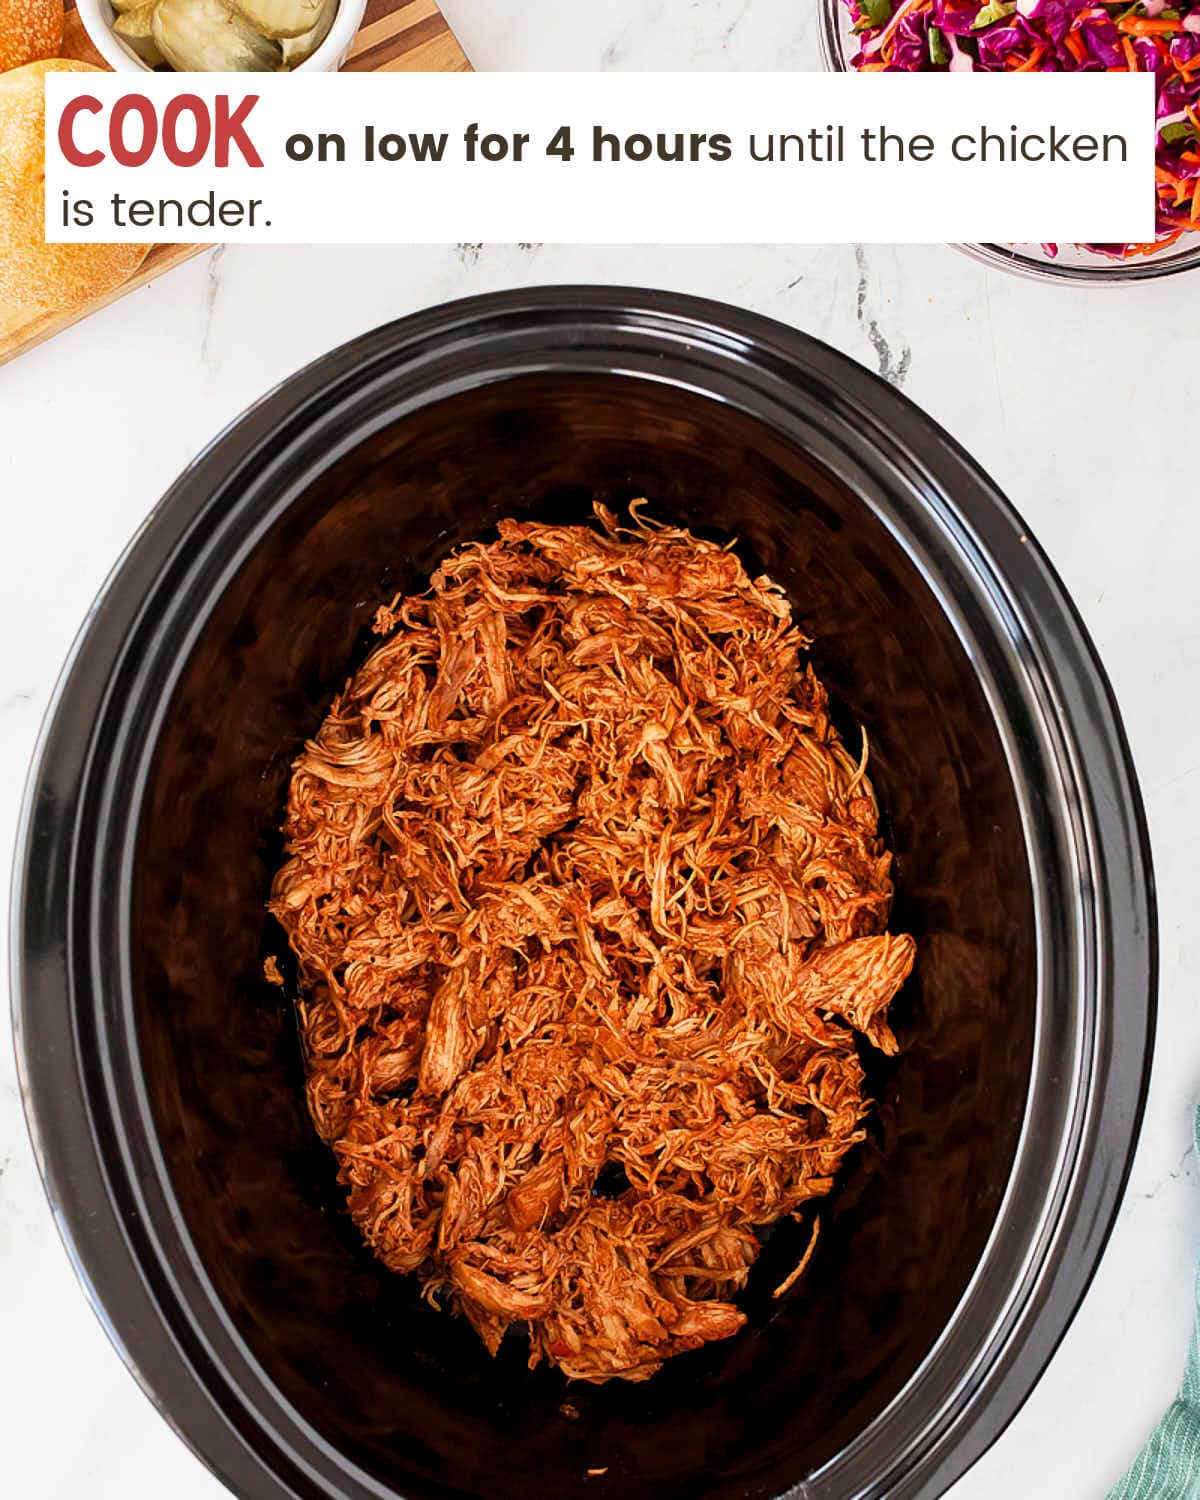 A slow cooker with a chicken in it, perfect for making tasty Slow Cooker Pulled Chicken or delicious Slow Cooker Pulled Chicken Sandwiches.